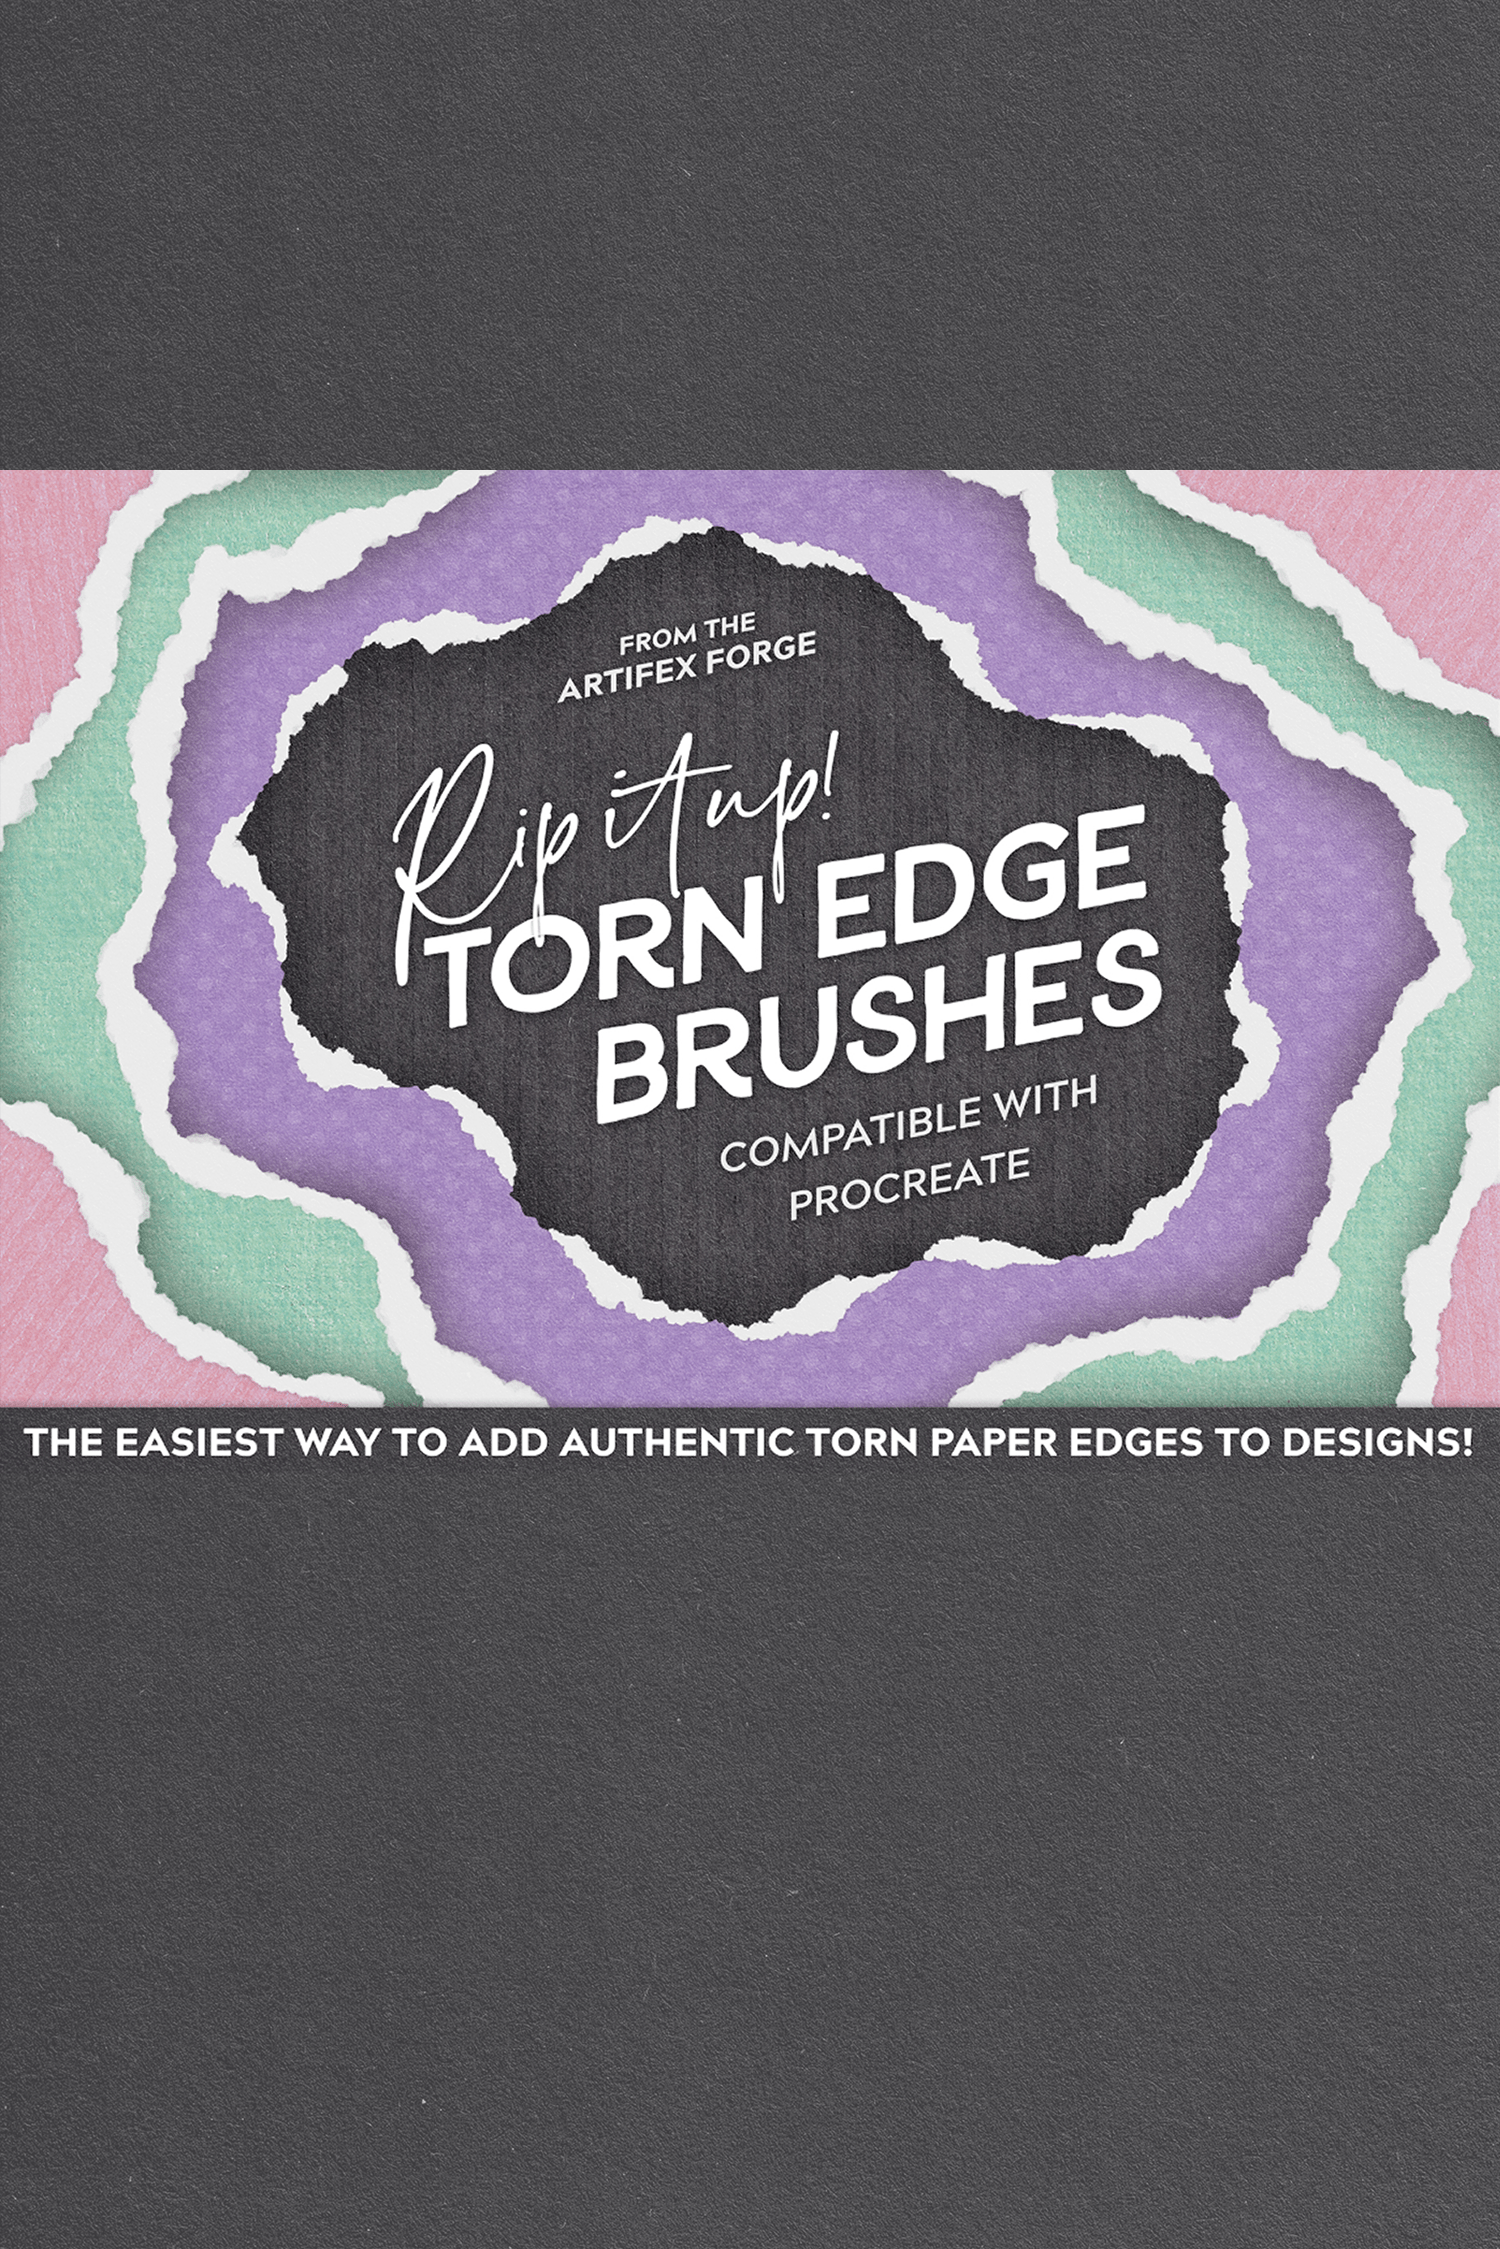 Rip it up! - Torn Paper Edge Brushes by Artifex Forge